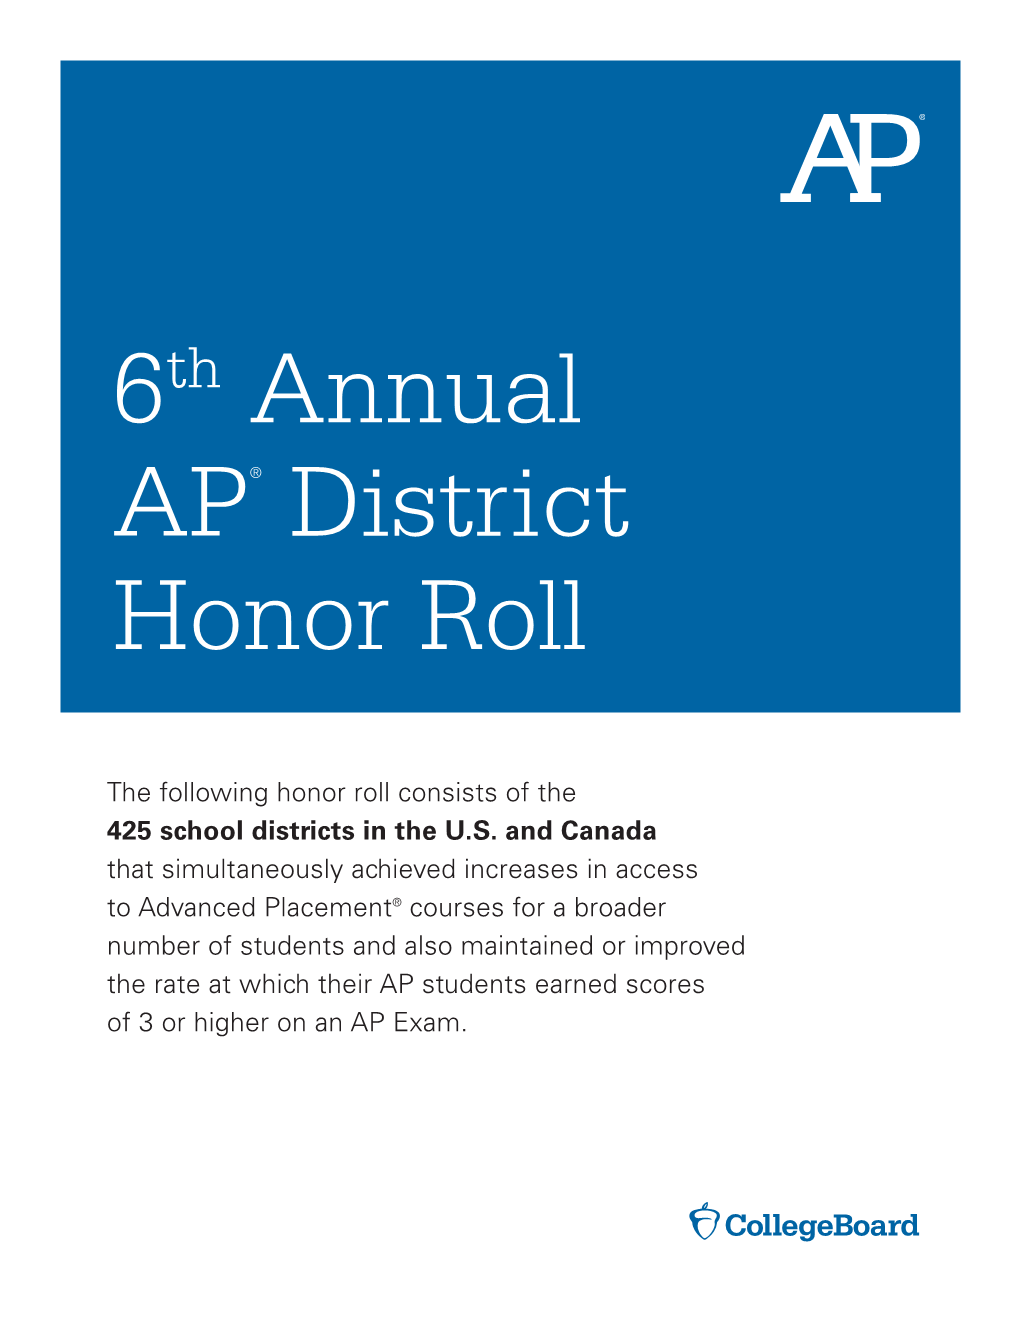 6Th Annual AP District Honor Roll